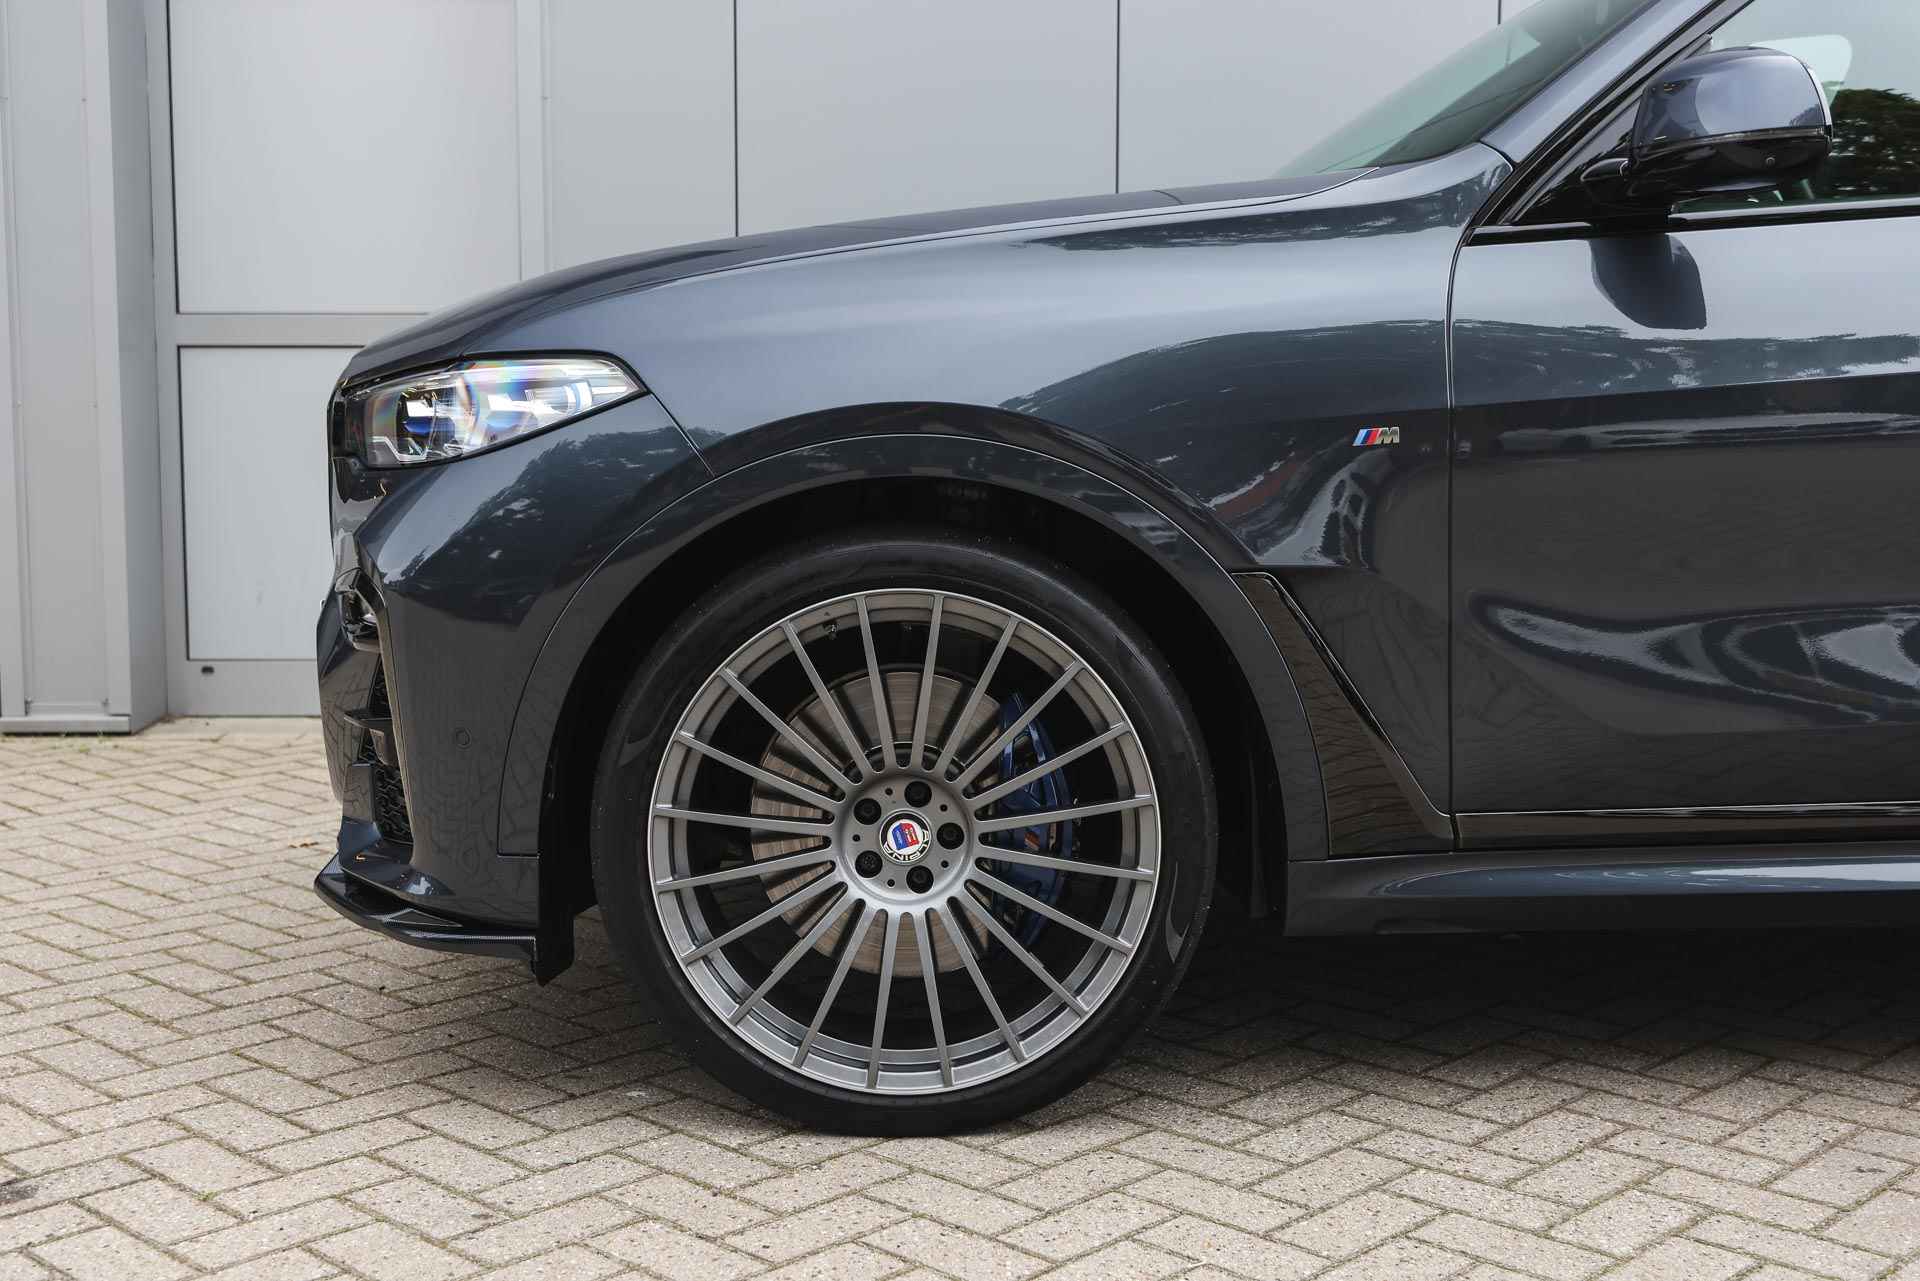 BMW X7 M50i High Executive Automaat / Active Steering / Stoelventilatie / Laserlight / Soft Close / Head-Up / Gesture Control / Parking Assistant Plus / Alpina wielen 23 inch - 6/56